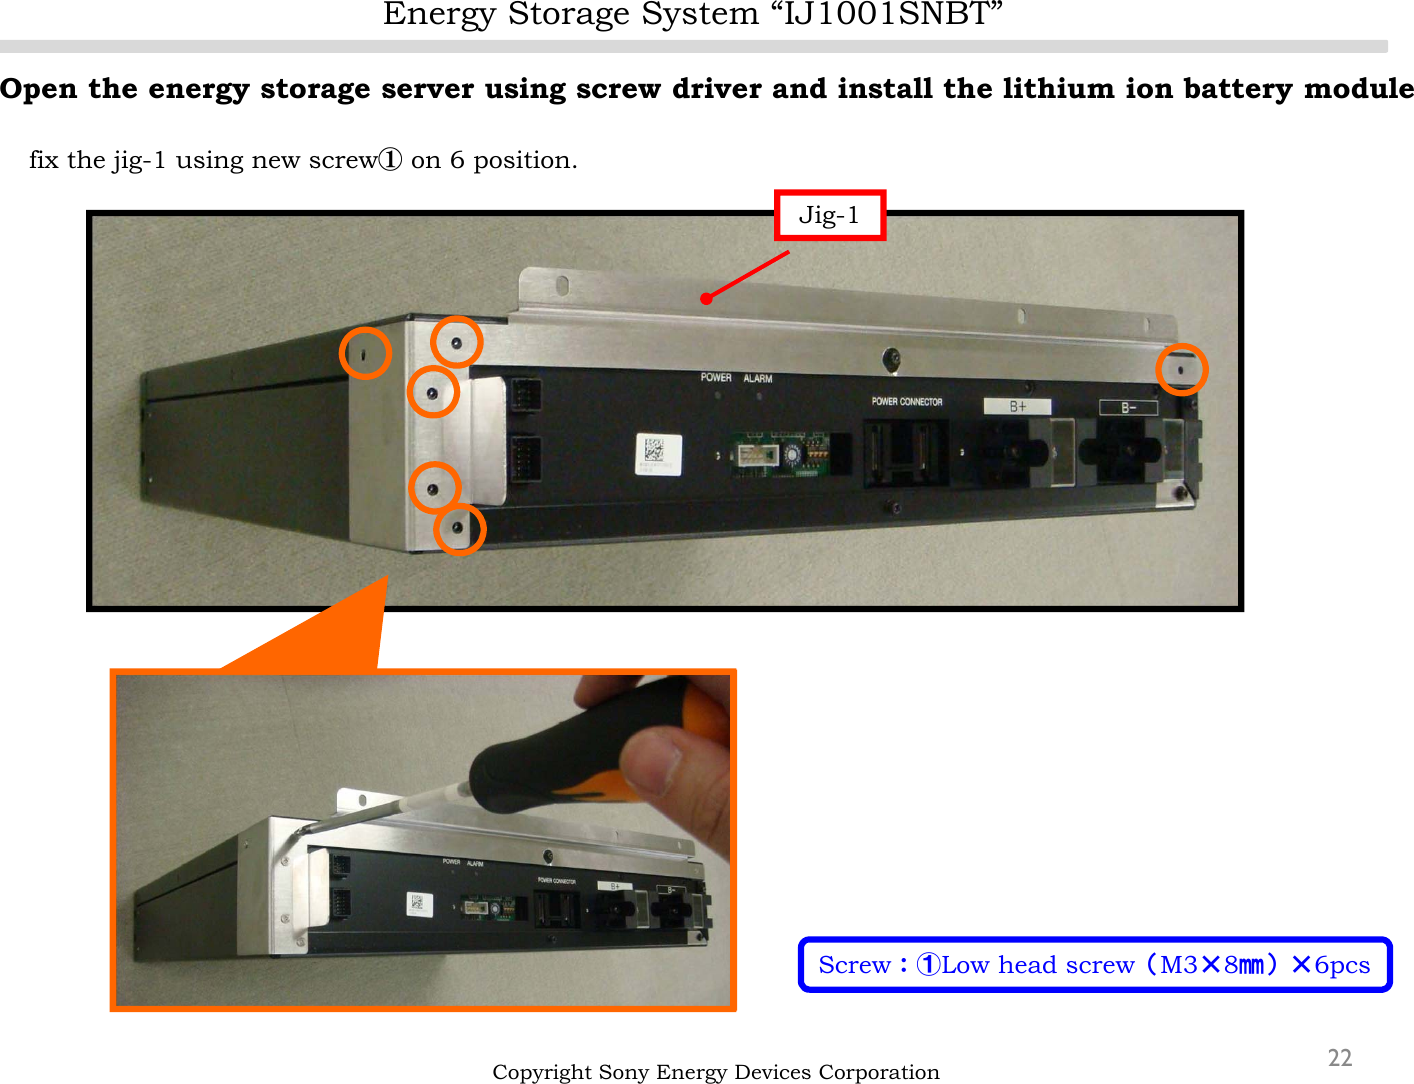 Energy Storage System “IJ1001SNBT”22Open the energy storage server using screw driver and install the lithium ion battery modulefix the jig-1 using new screw①on 6 position.Copyright Sony Energy Devices CorporationJig-1Screw：①Low head screw（M3×8㎜）×6pcs